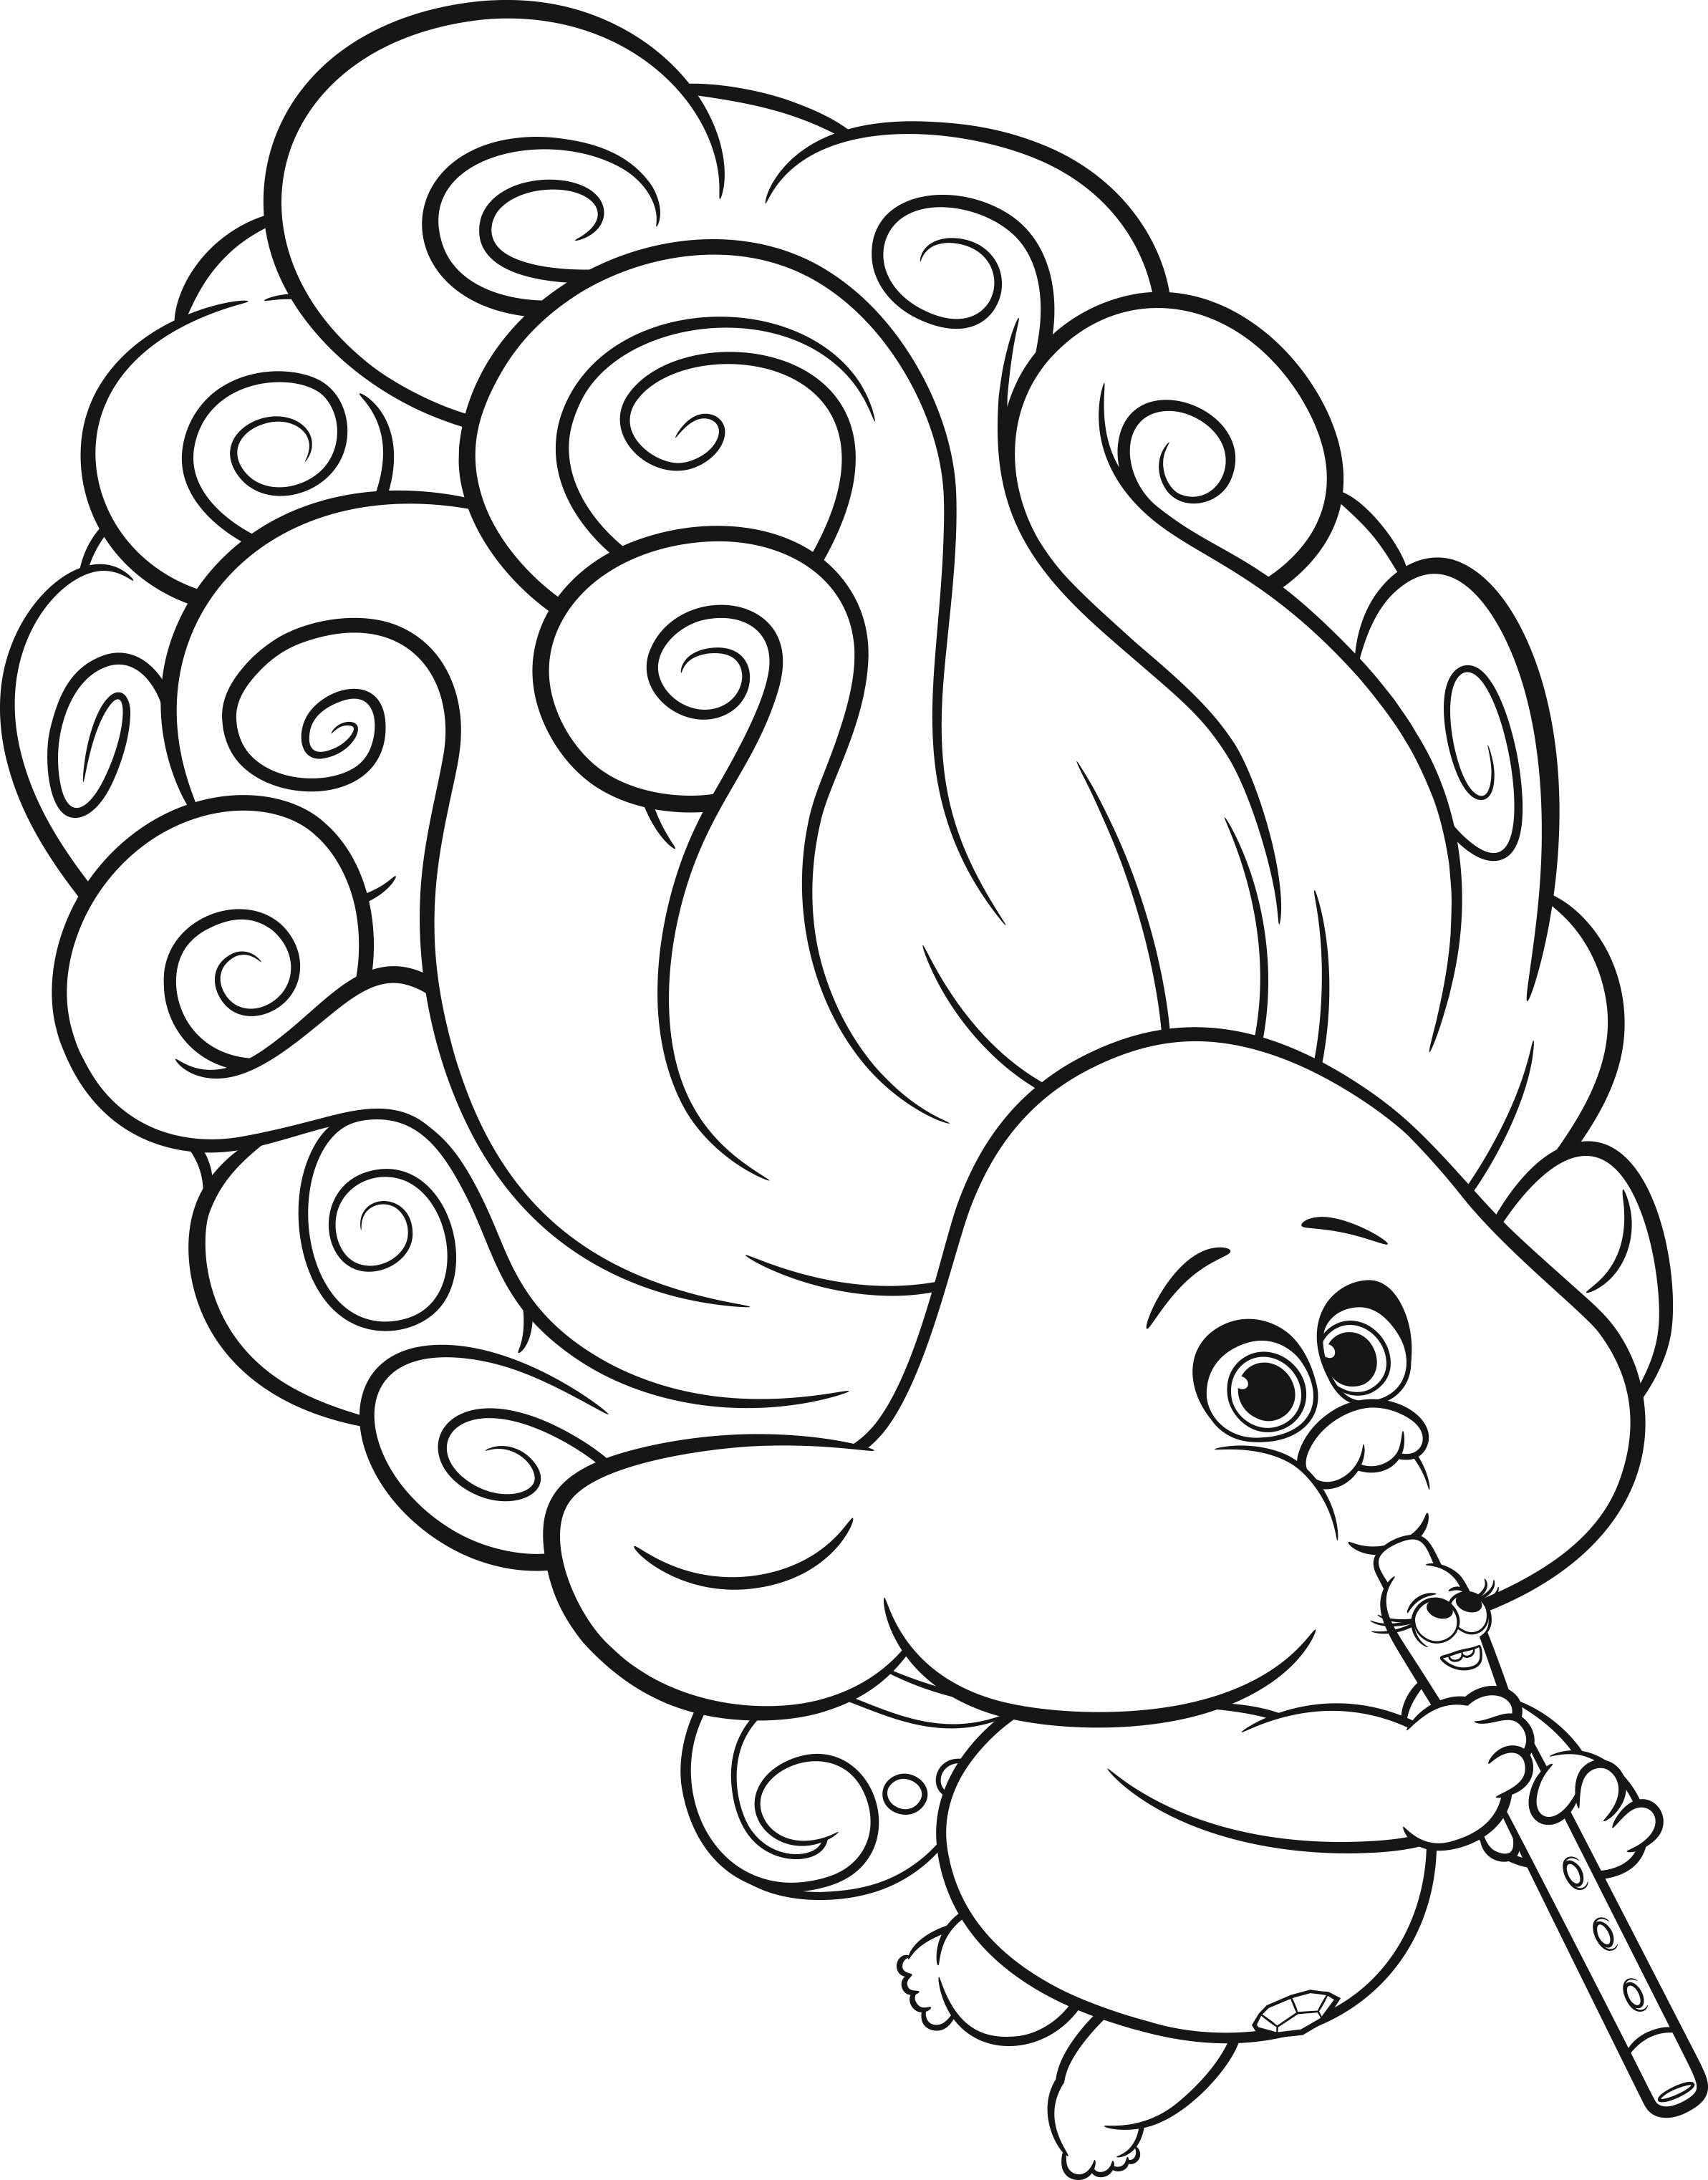 Best Coloring Pages Site: Trolls World Tour 2 Coloring Pages